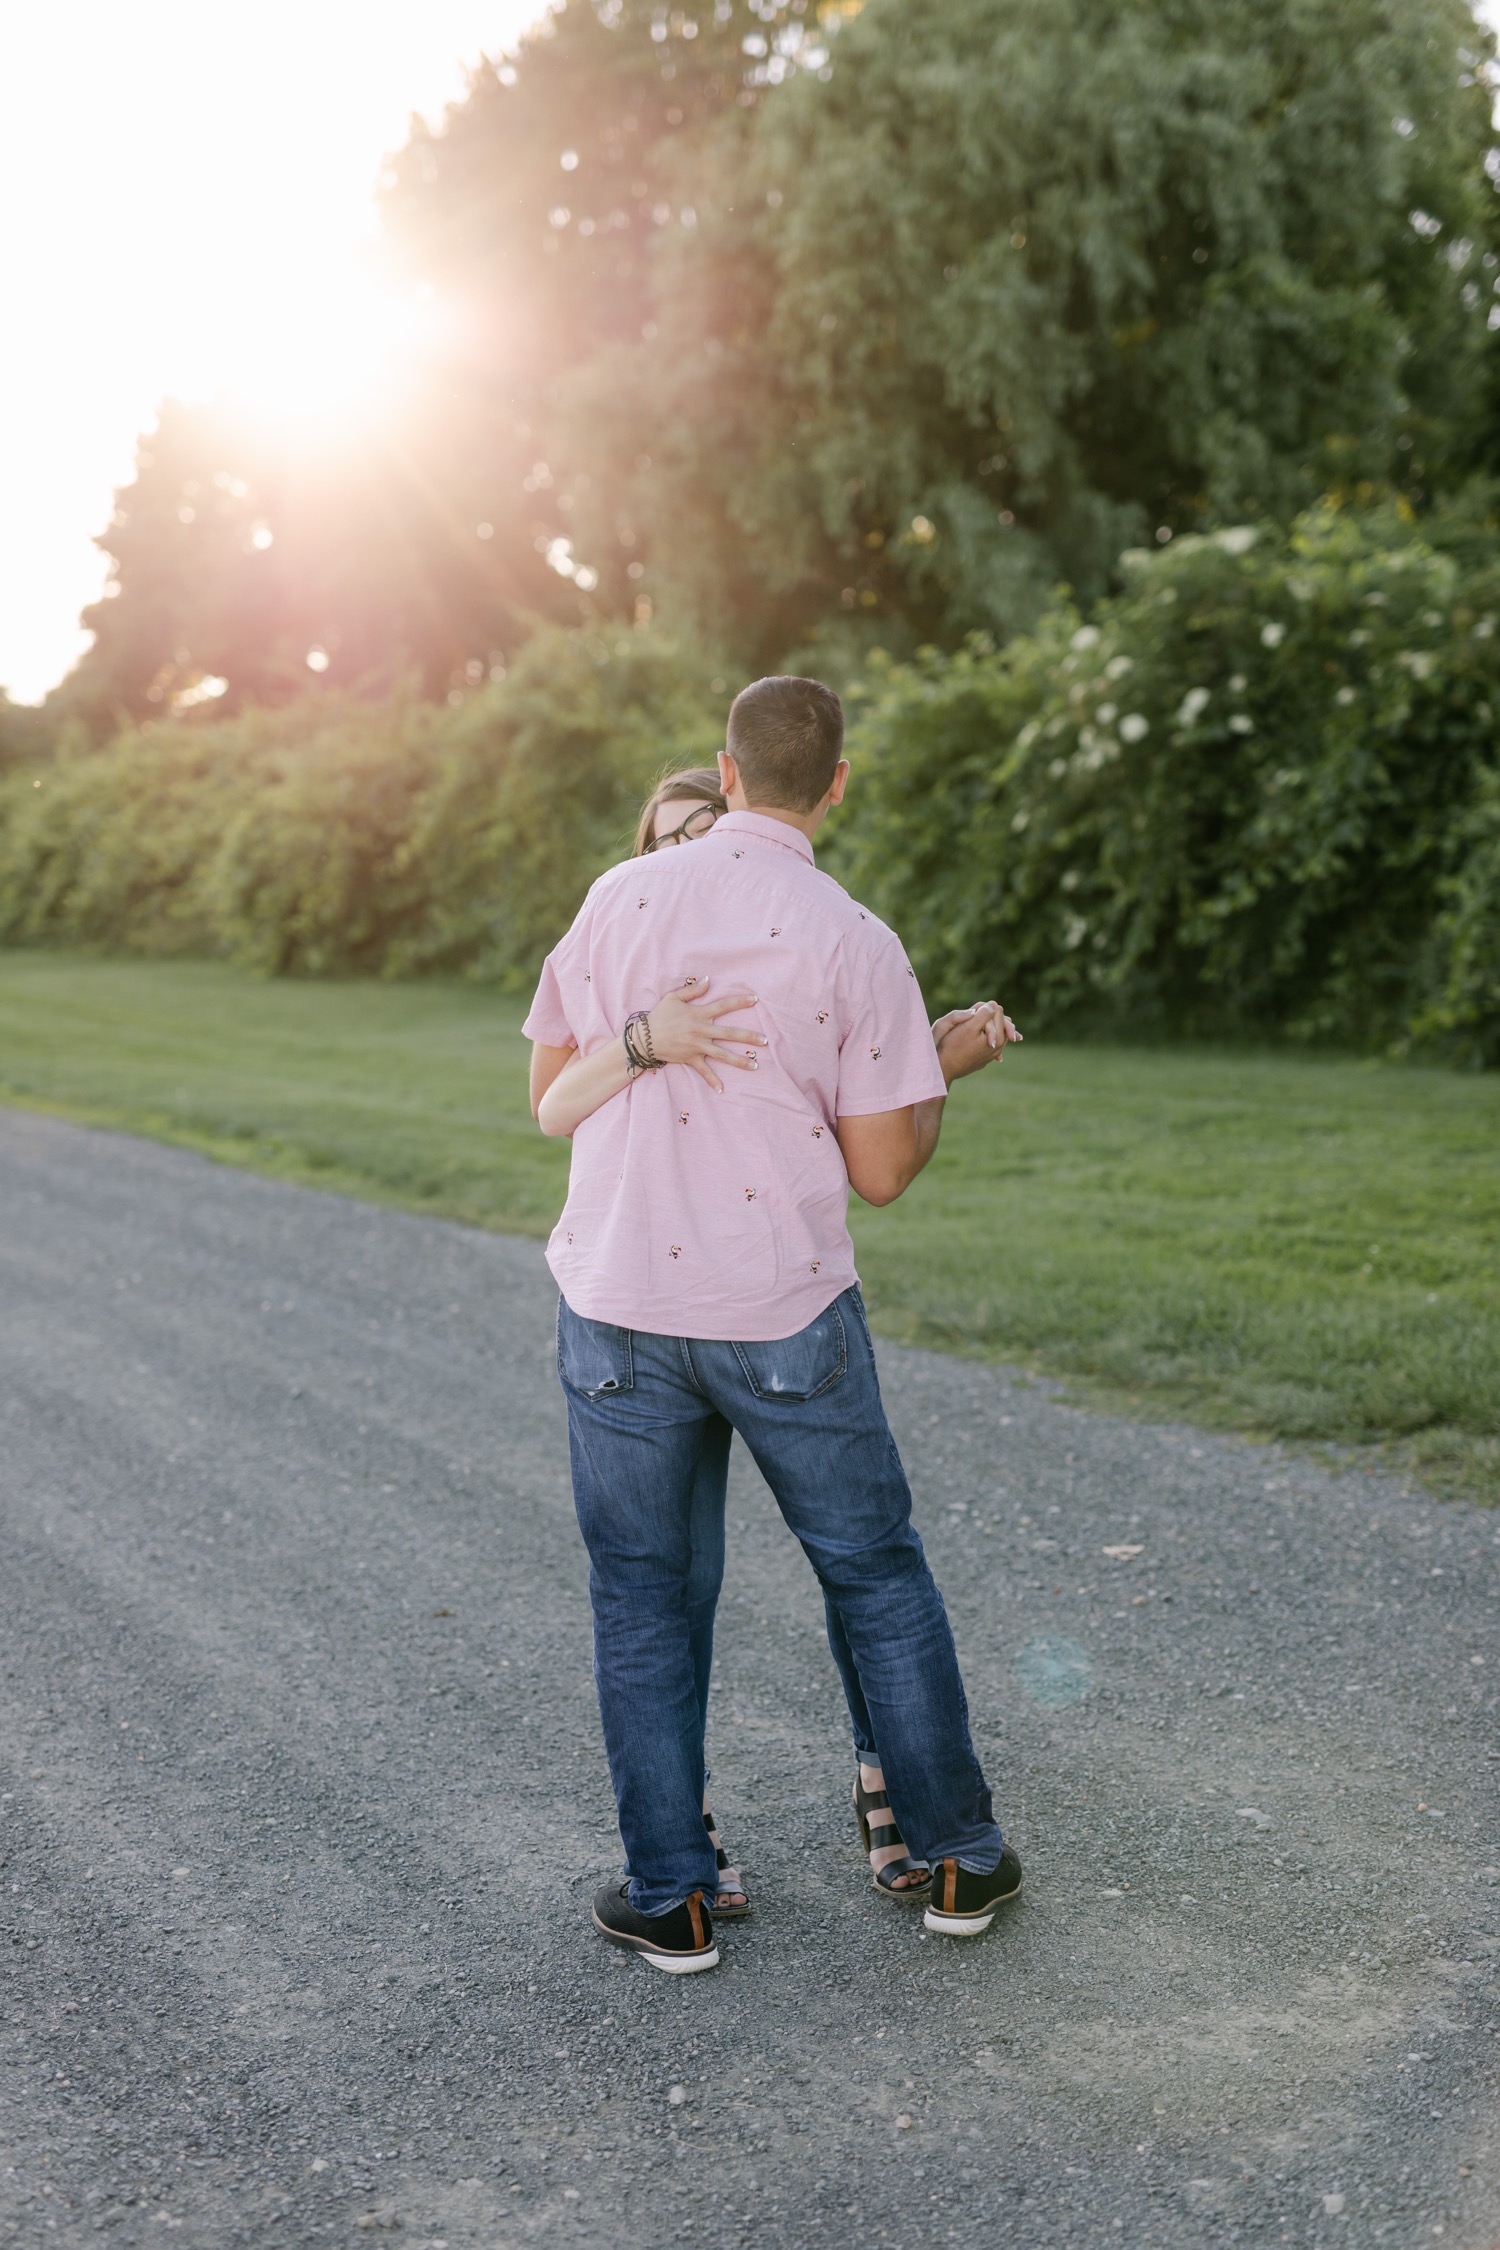 Emily + Tyler Hilltop Farm Engagement Session Suffield, CT » Beet and Blossom image pic picture